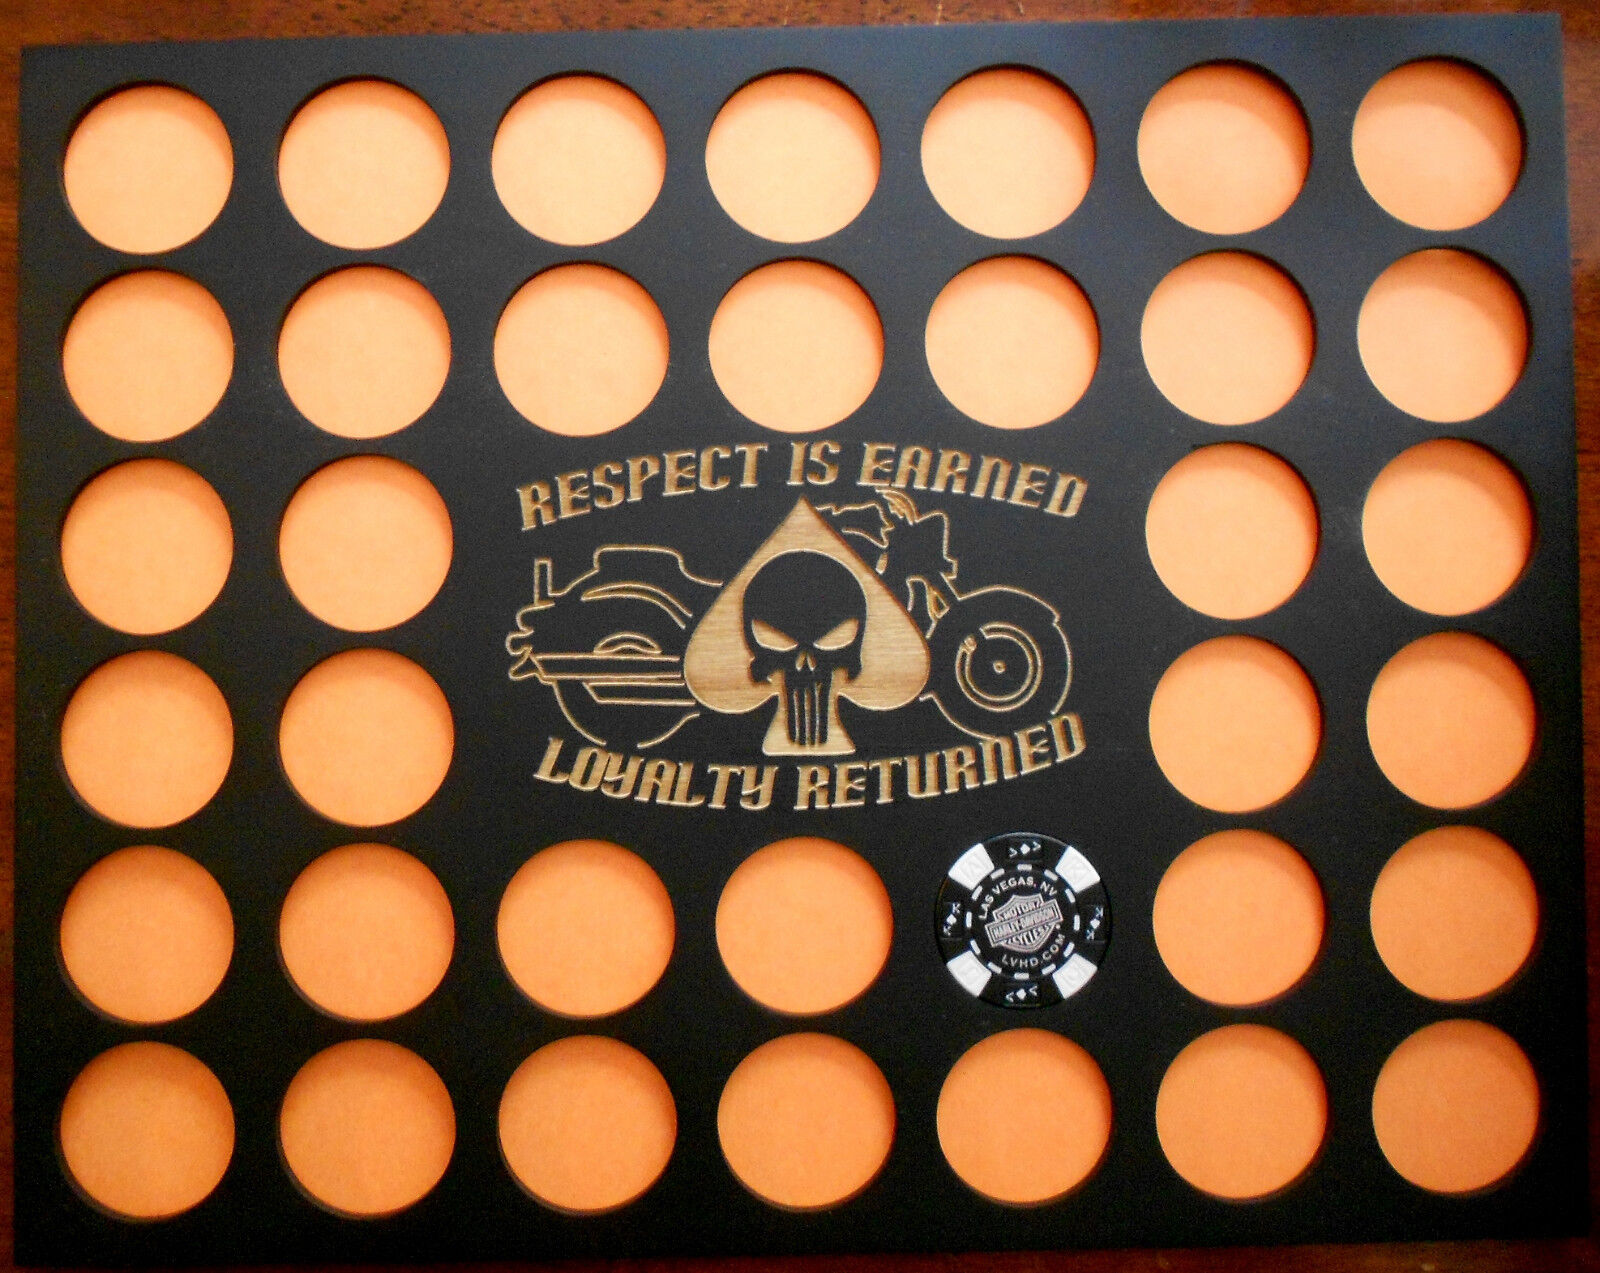 36 Poker Chip Display Frame Insert For Harley Davidson/Casino Punisher/Respect Carved By Heart™ Does Not Apply